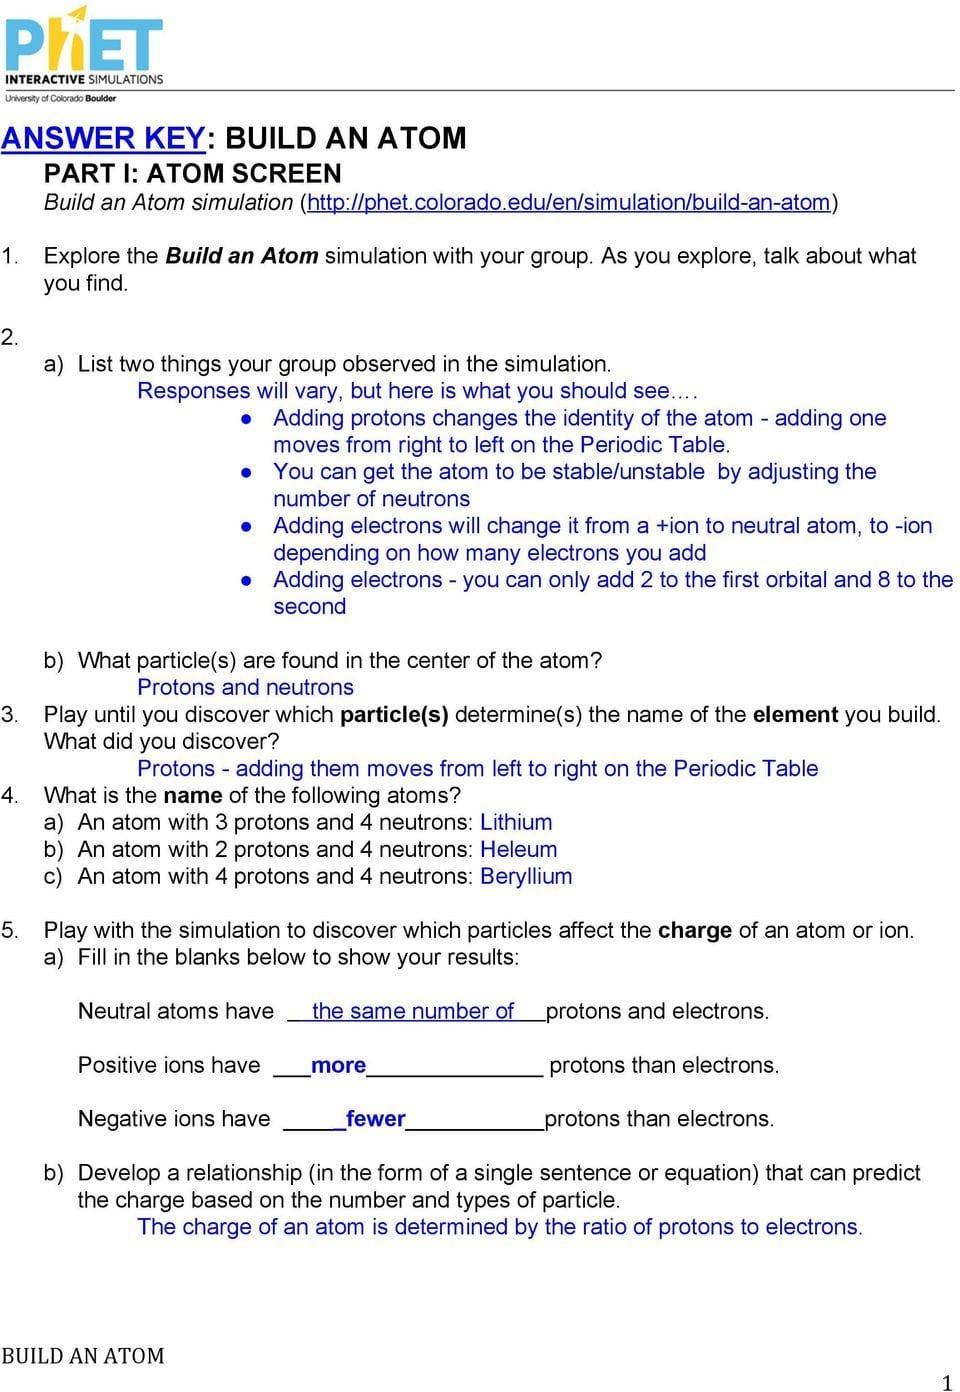 abundance-of-isotopes-chem-worksheet-4-3-answers-db-excel